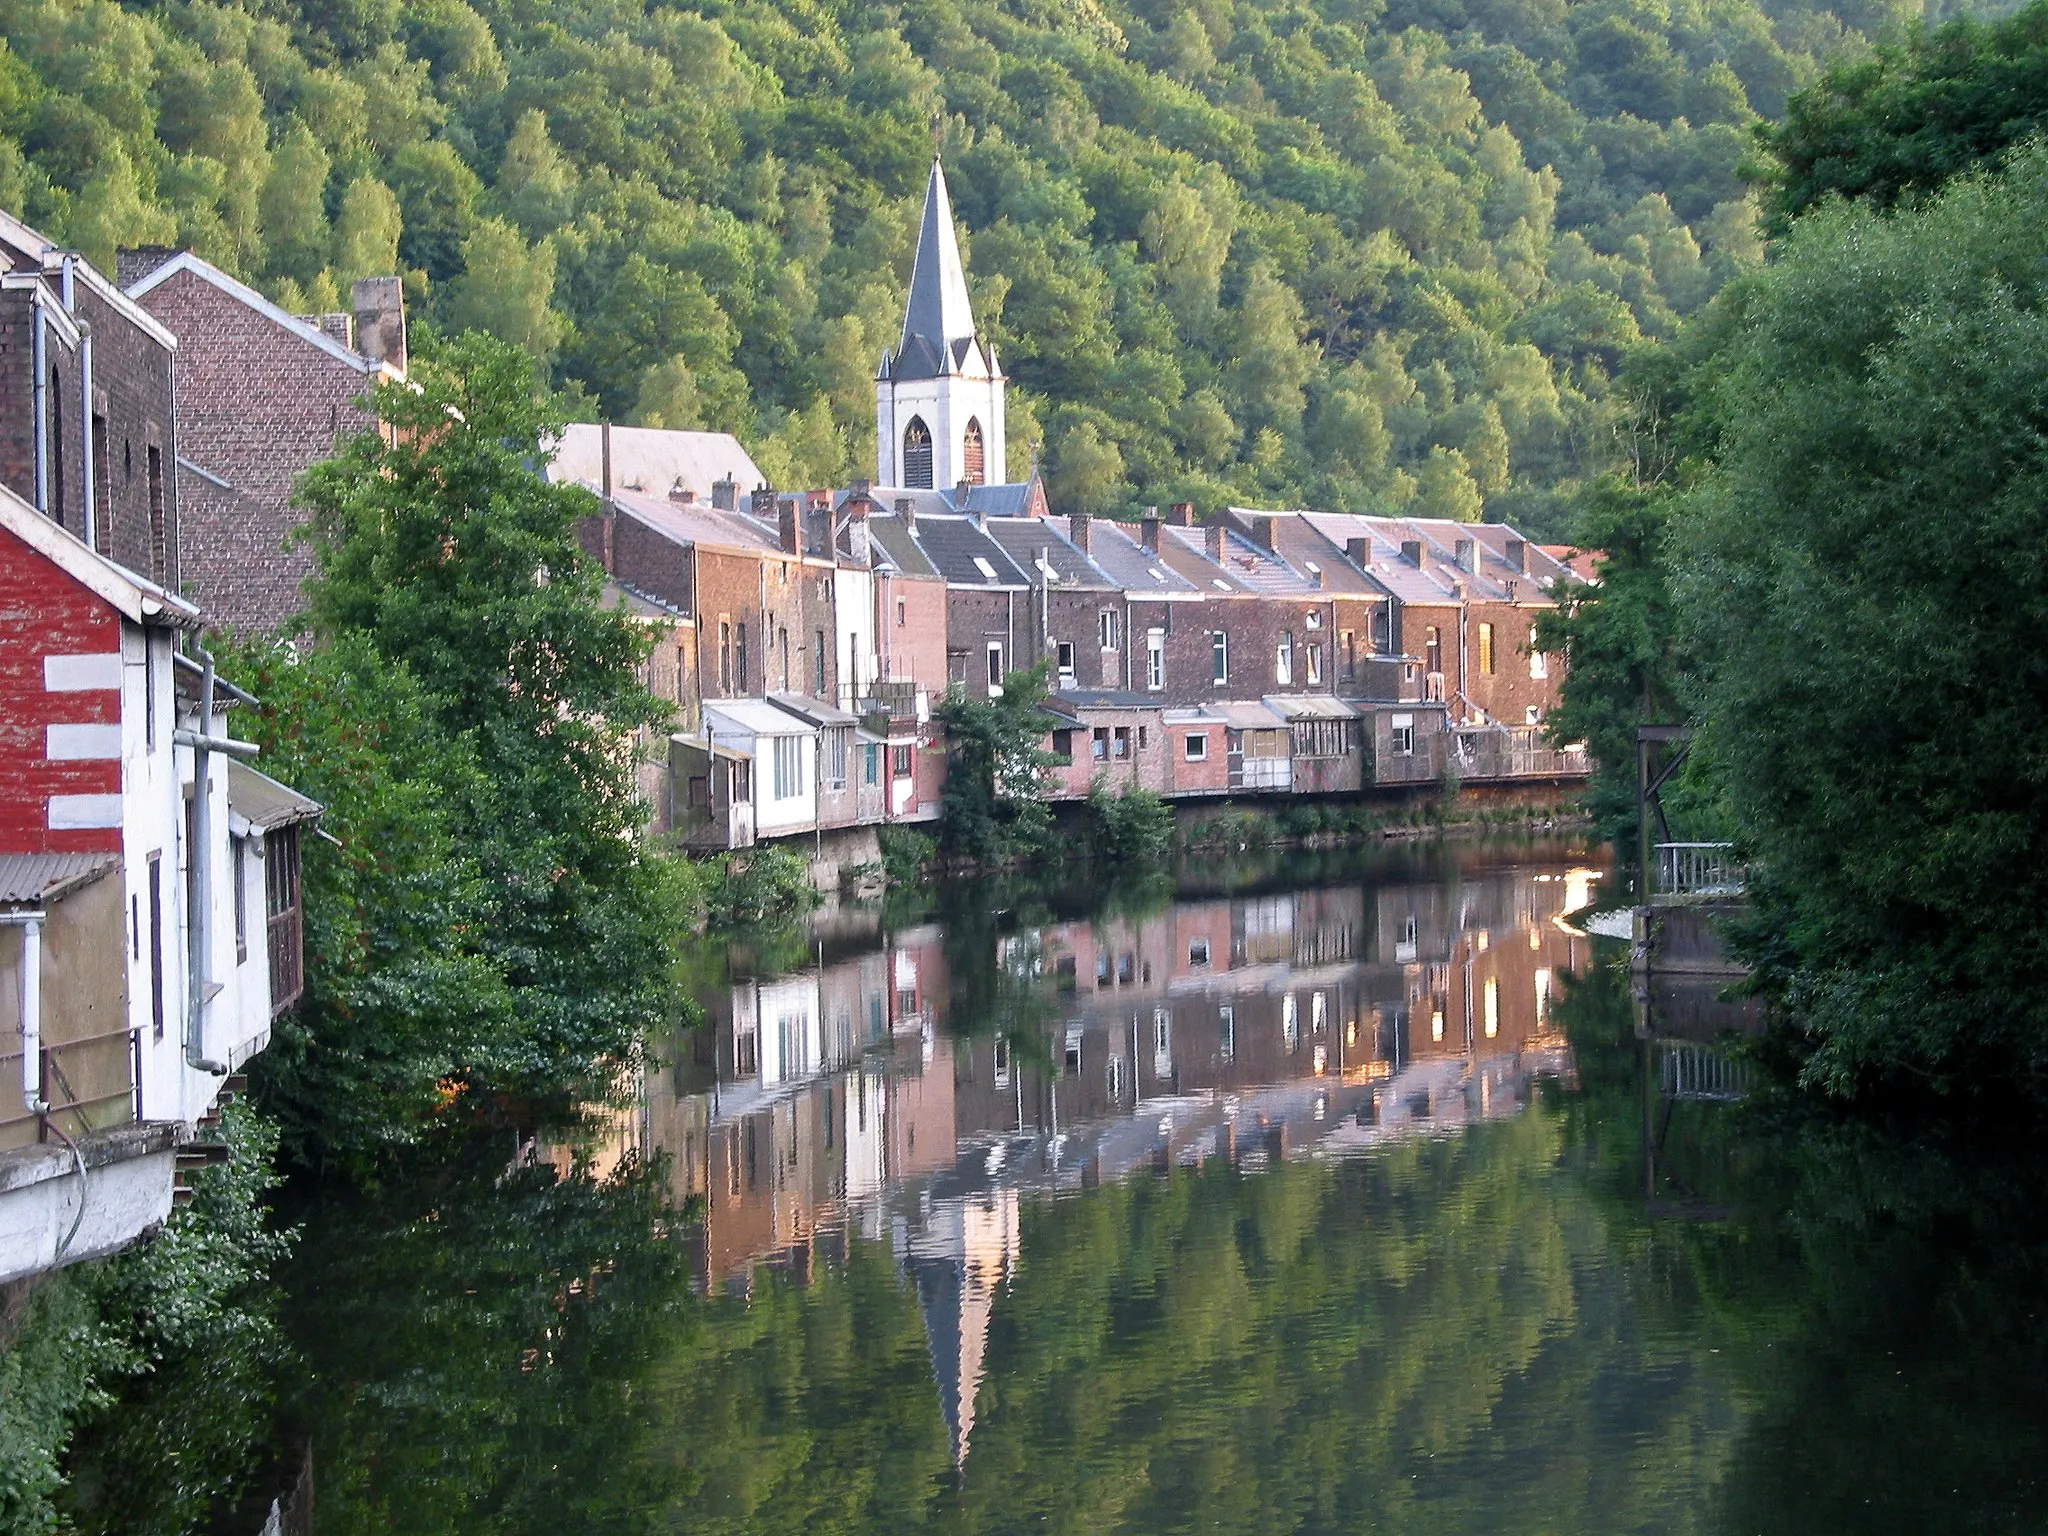 Photo showing: Chaudfontaine (Belgium), reflected image of the Chaudfontaine village in the Vesdre river.